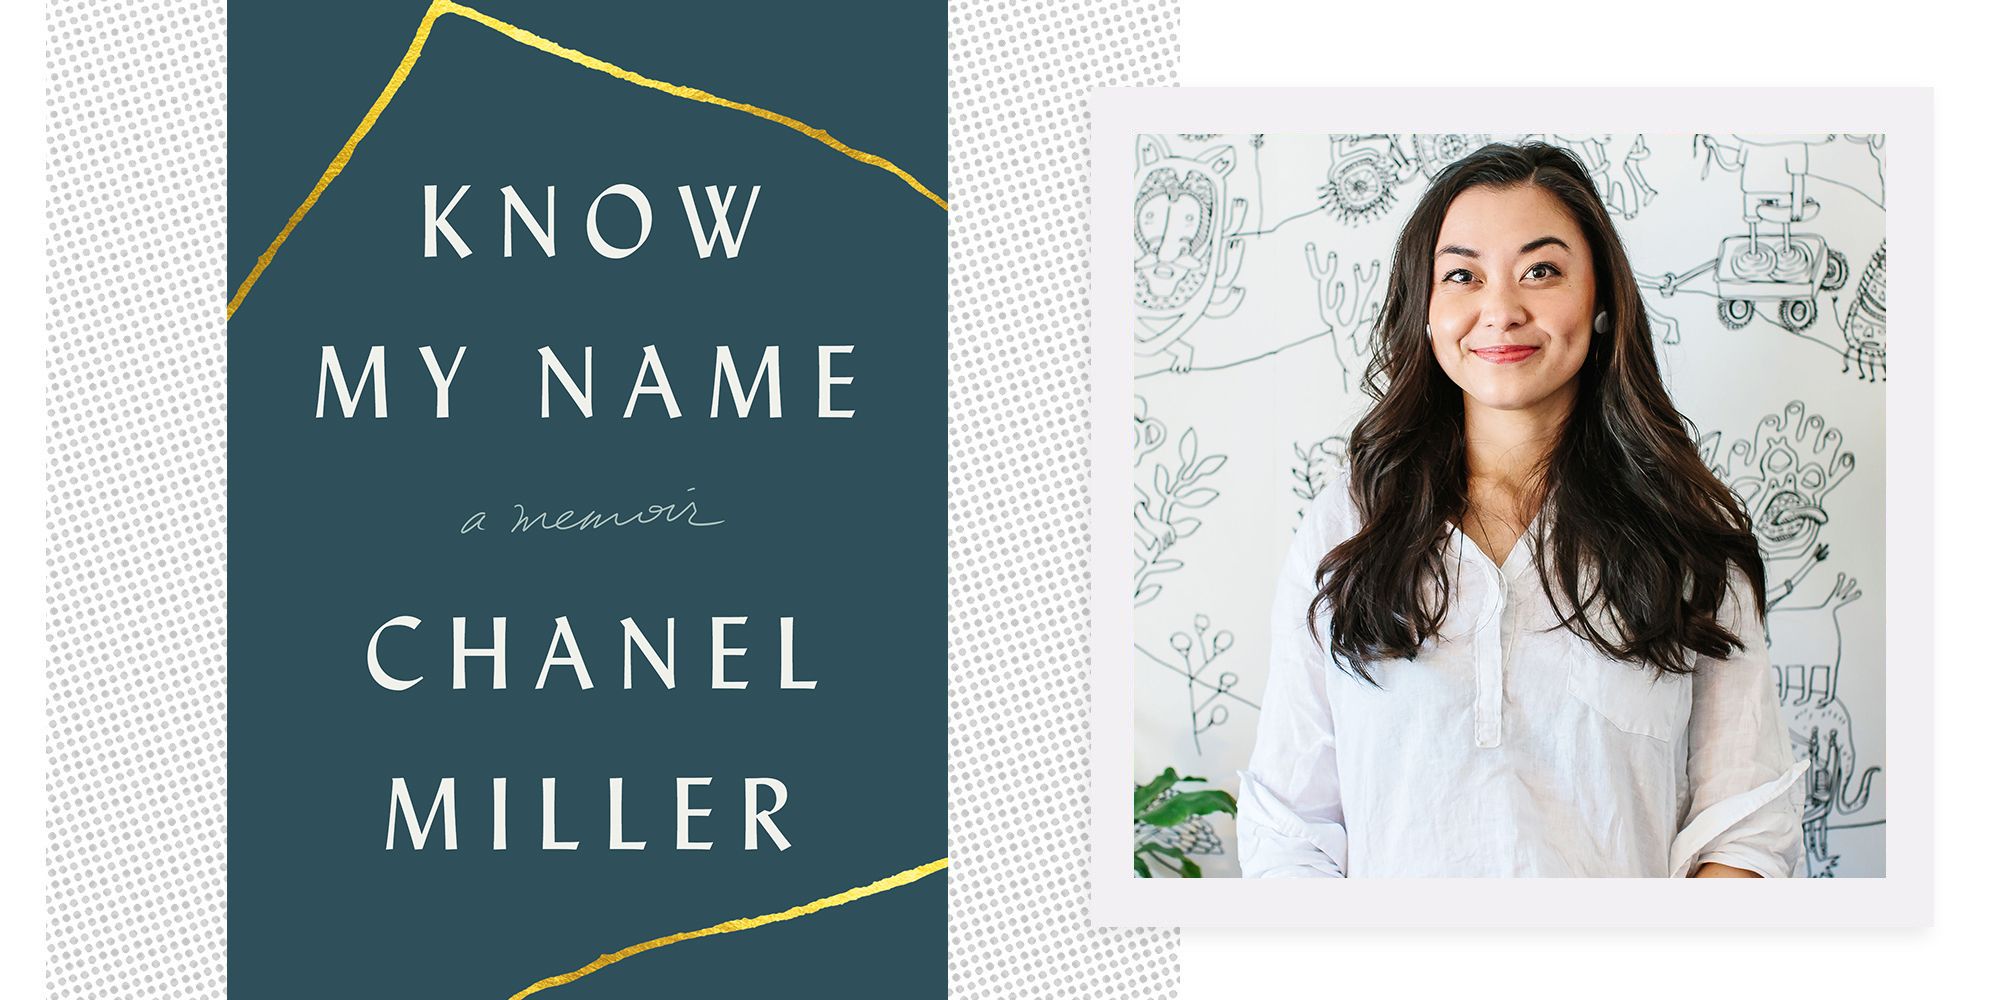 Know My Name by Chanel Miller review  memoir of a sexual assault   Autobiography and memoir  The Guardian